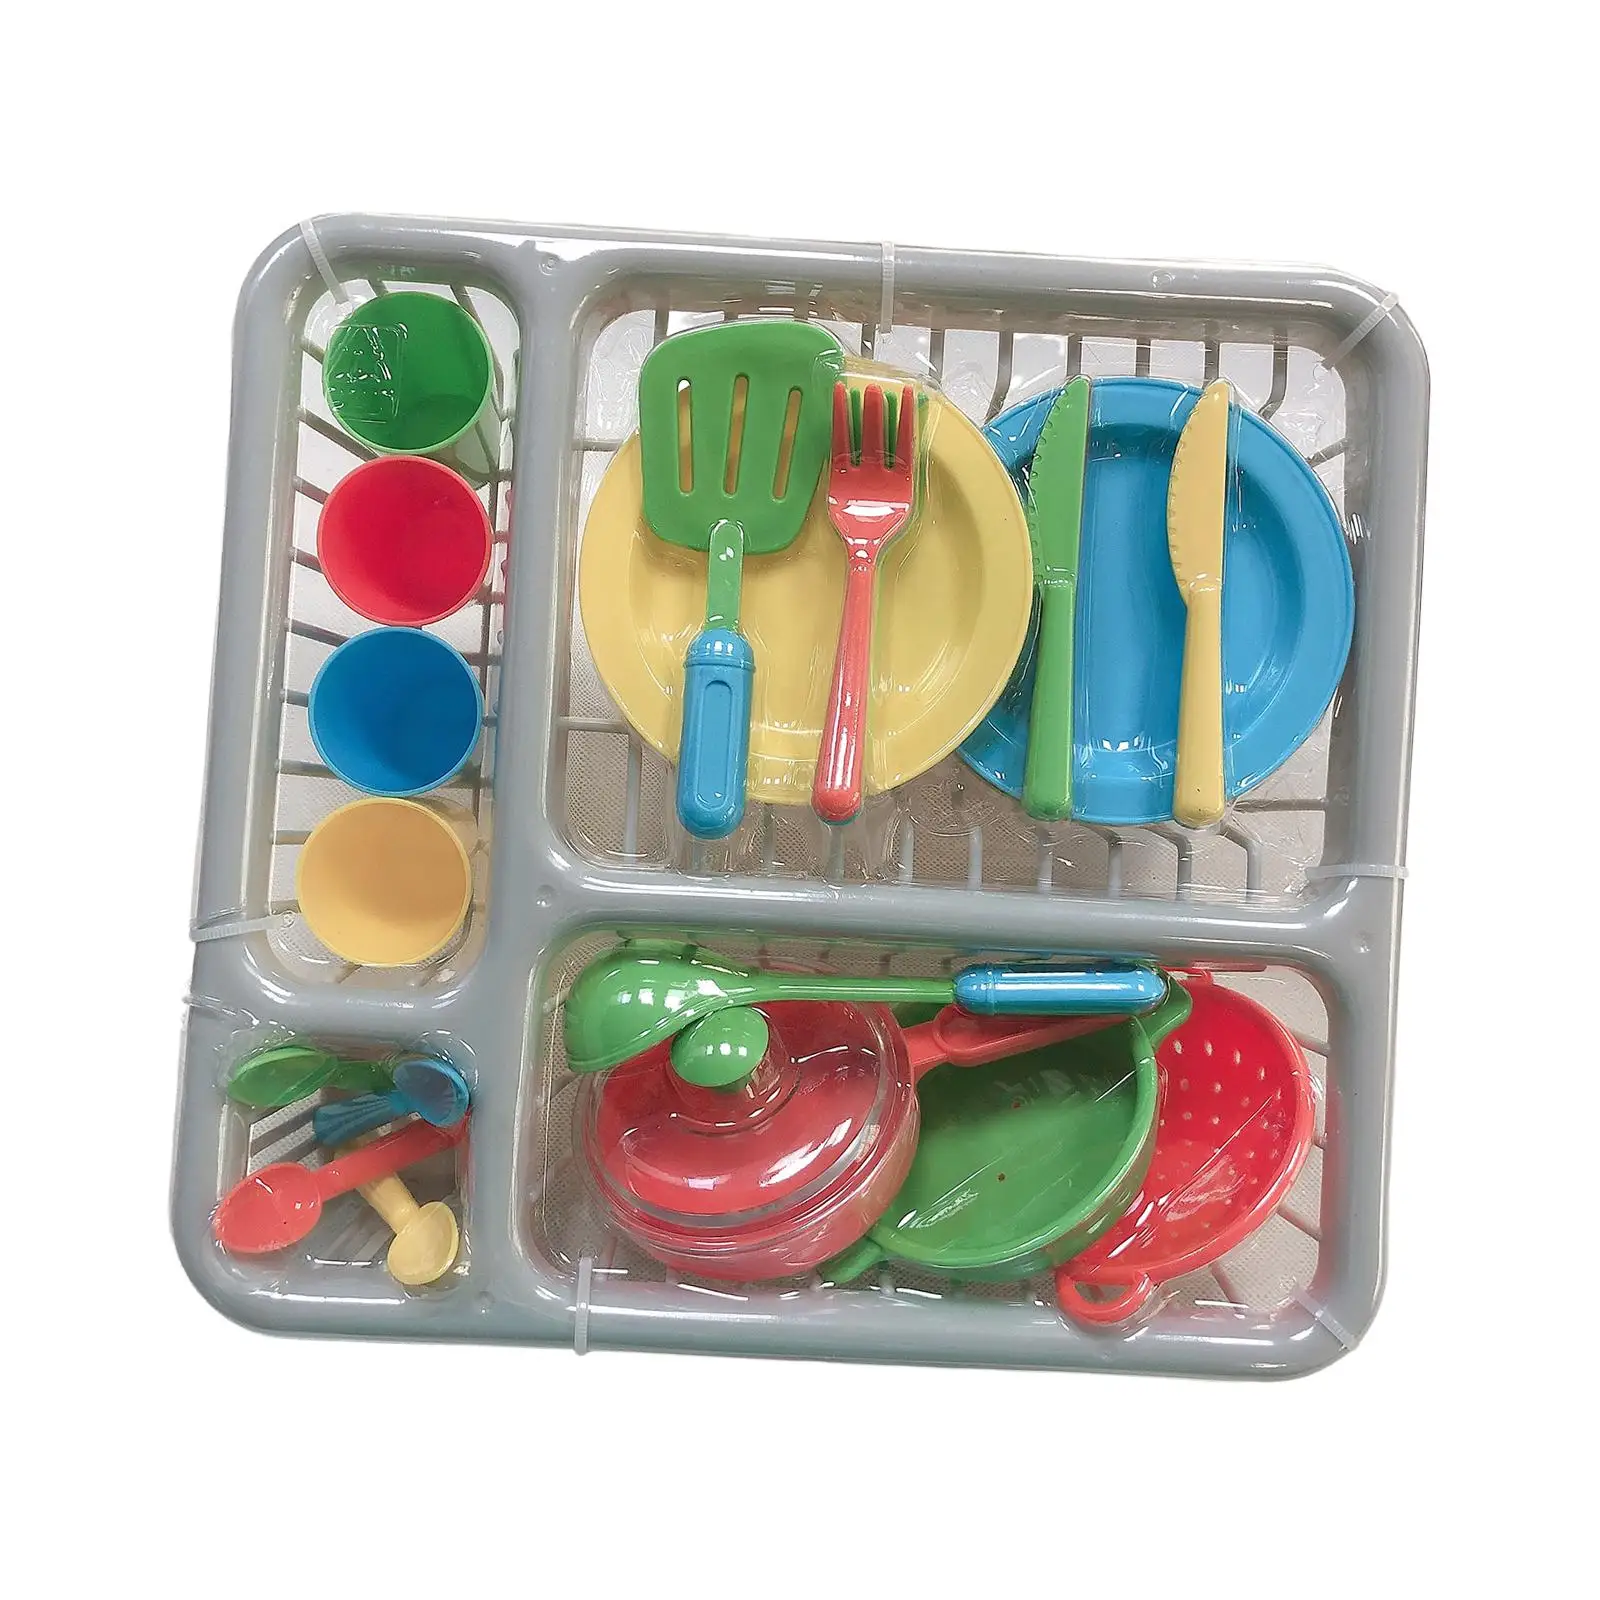 28Pcs Kids Play Pots and Dish Playset Play Kitchen Accessories for Party Toy Ages 3+ Years Old Birthday Gift Boys Girls Children